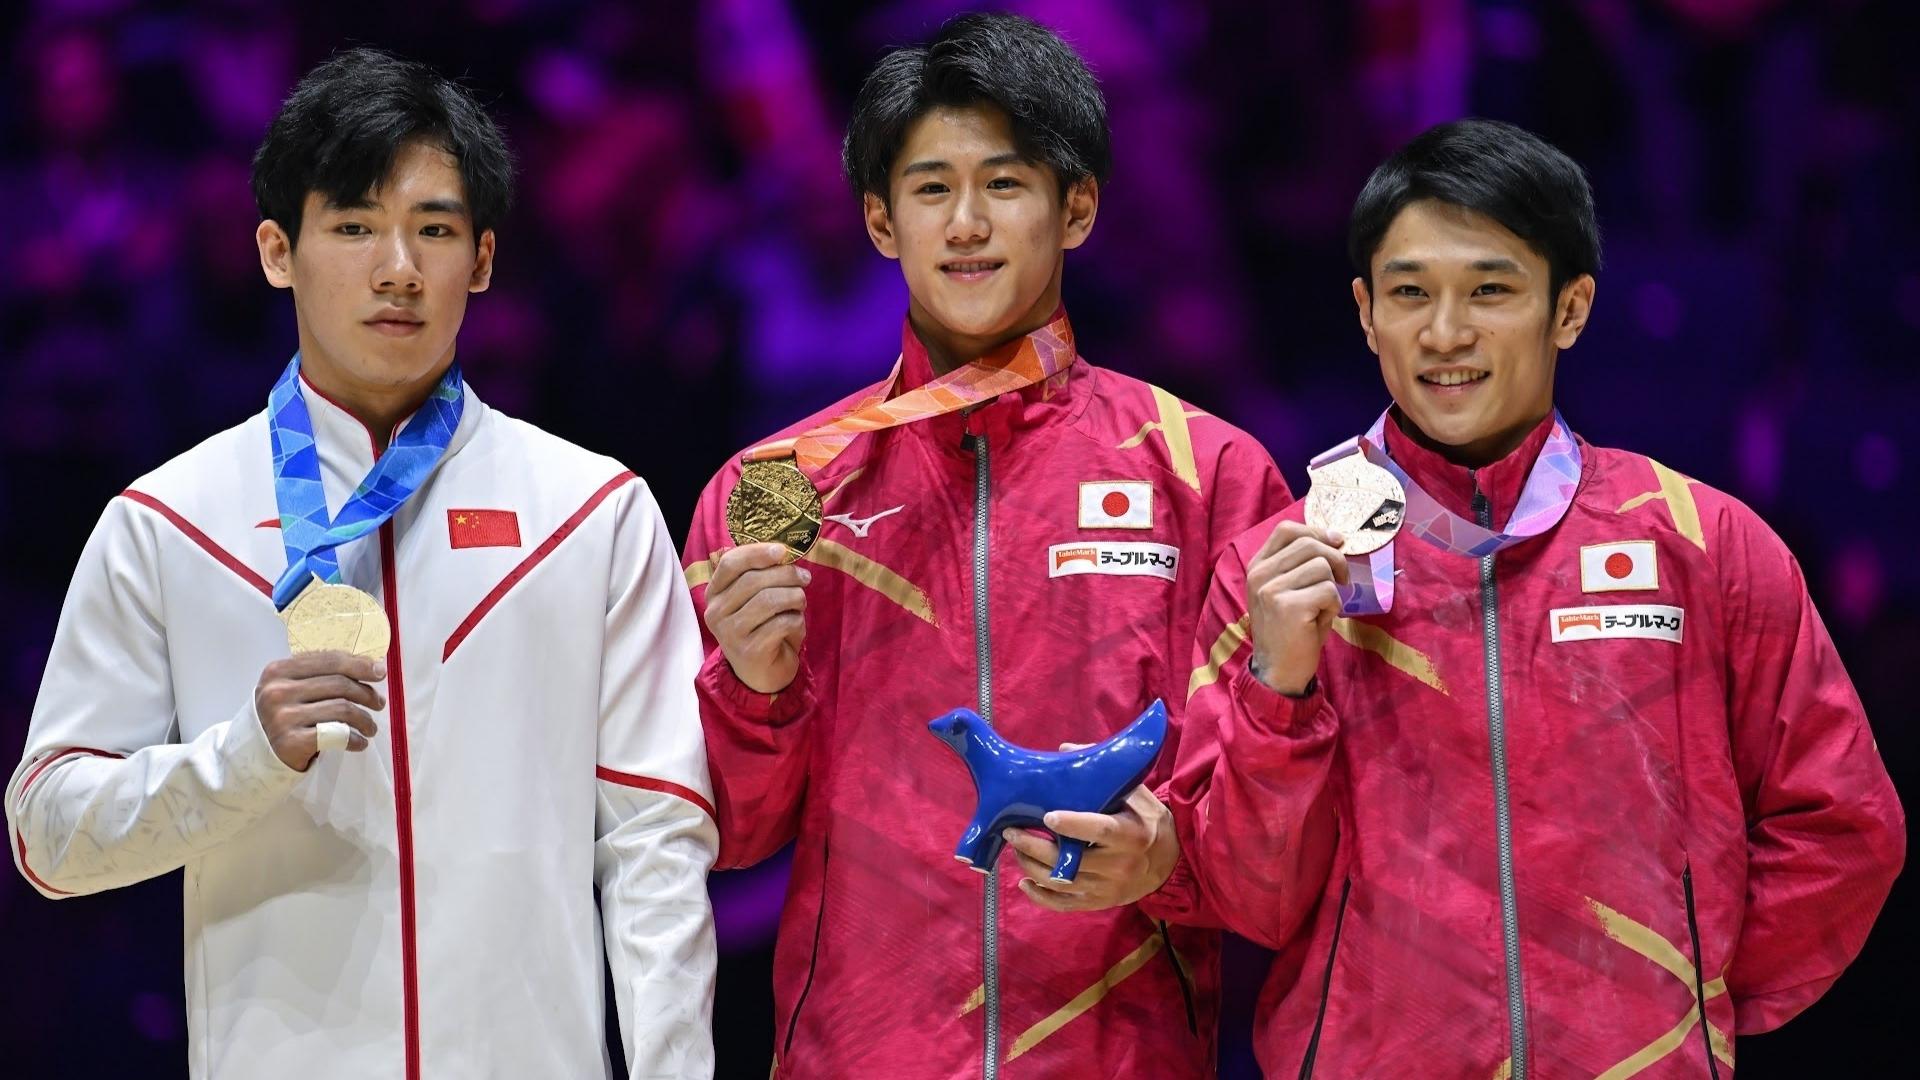 Japan's Daiki Hashimoto (center) won gold in the men's all-around on Friday at the 2022 World Gymnastics Championships. China's Boheng Zhang (left) and Japan's Wataru Tanigawa (right) won silver and bronze, respectively.